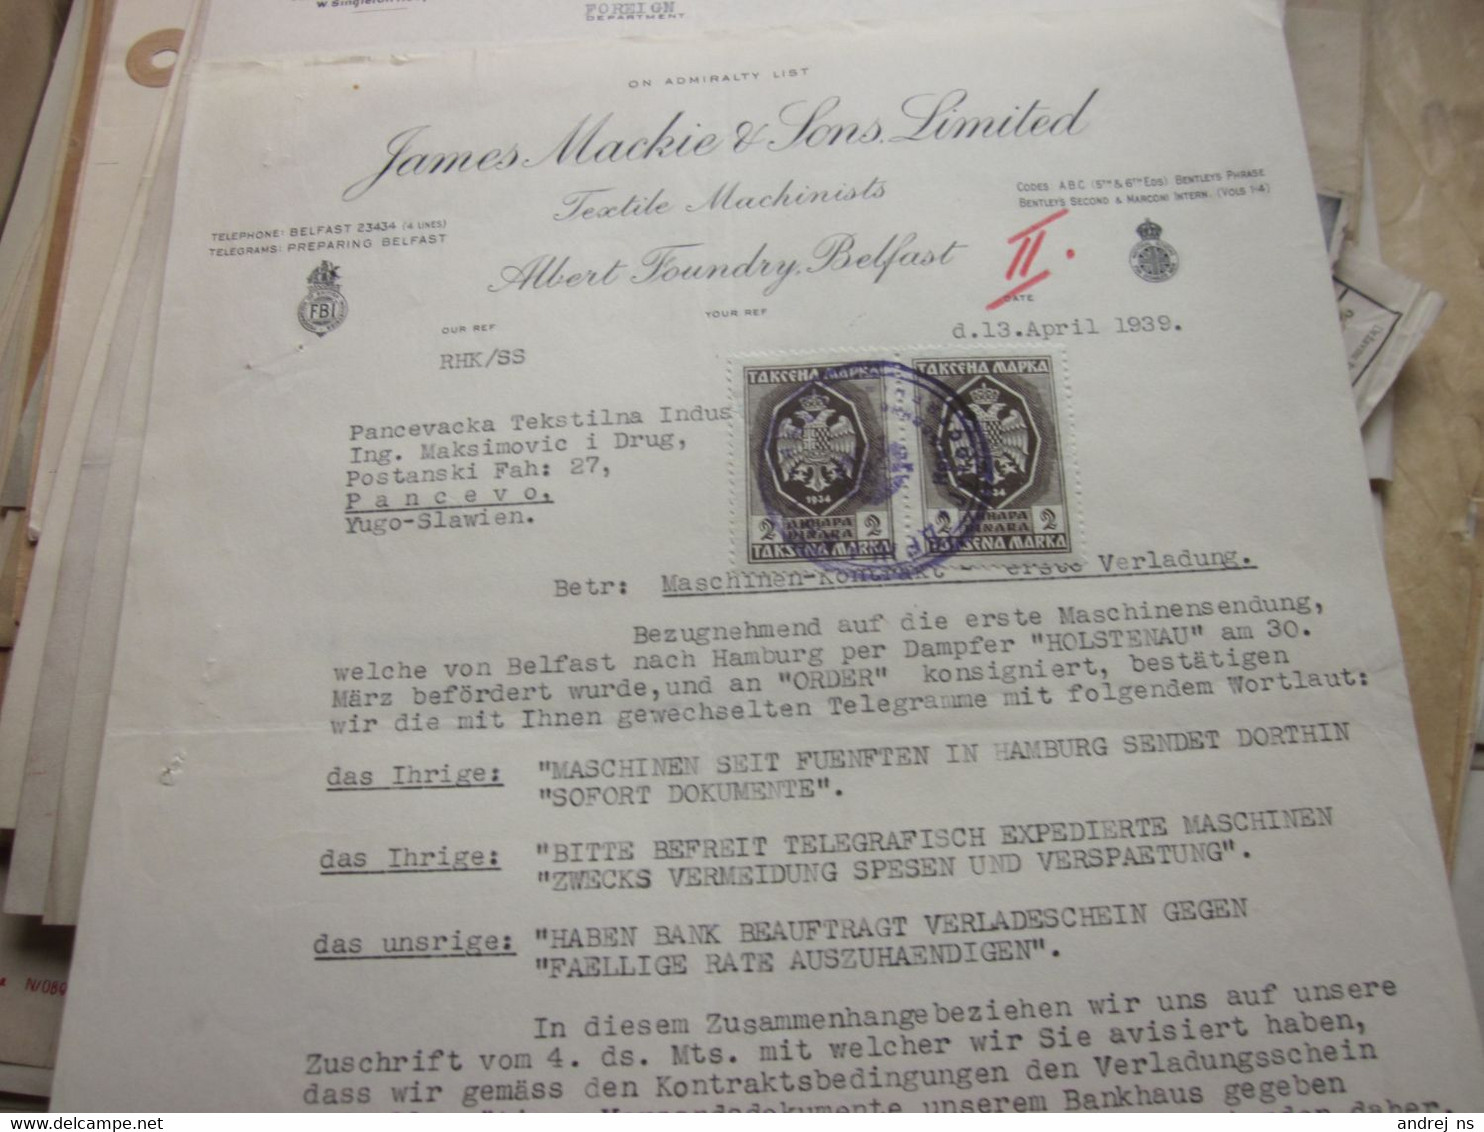 James Mackie Sons Limited Textile Machinists Albert Foundry Belfast 1939  Tax Stamps - Royaume-Uni